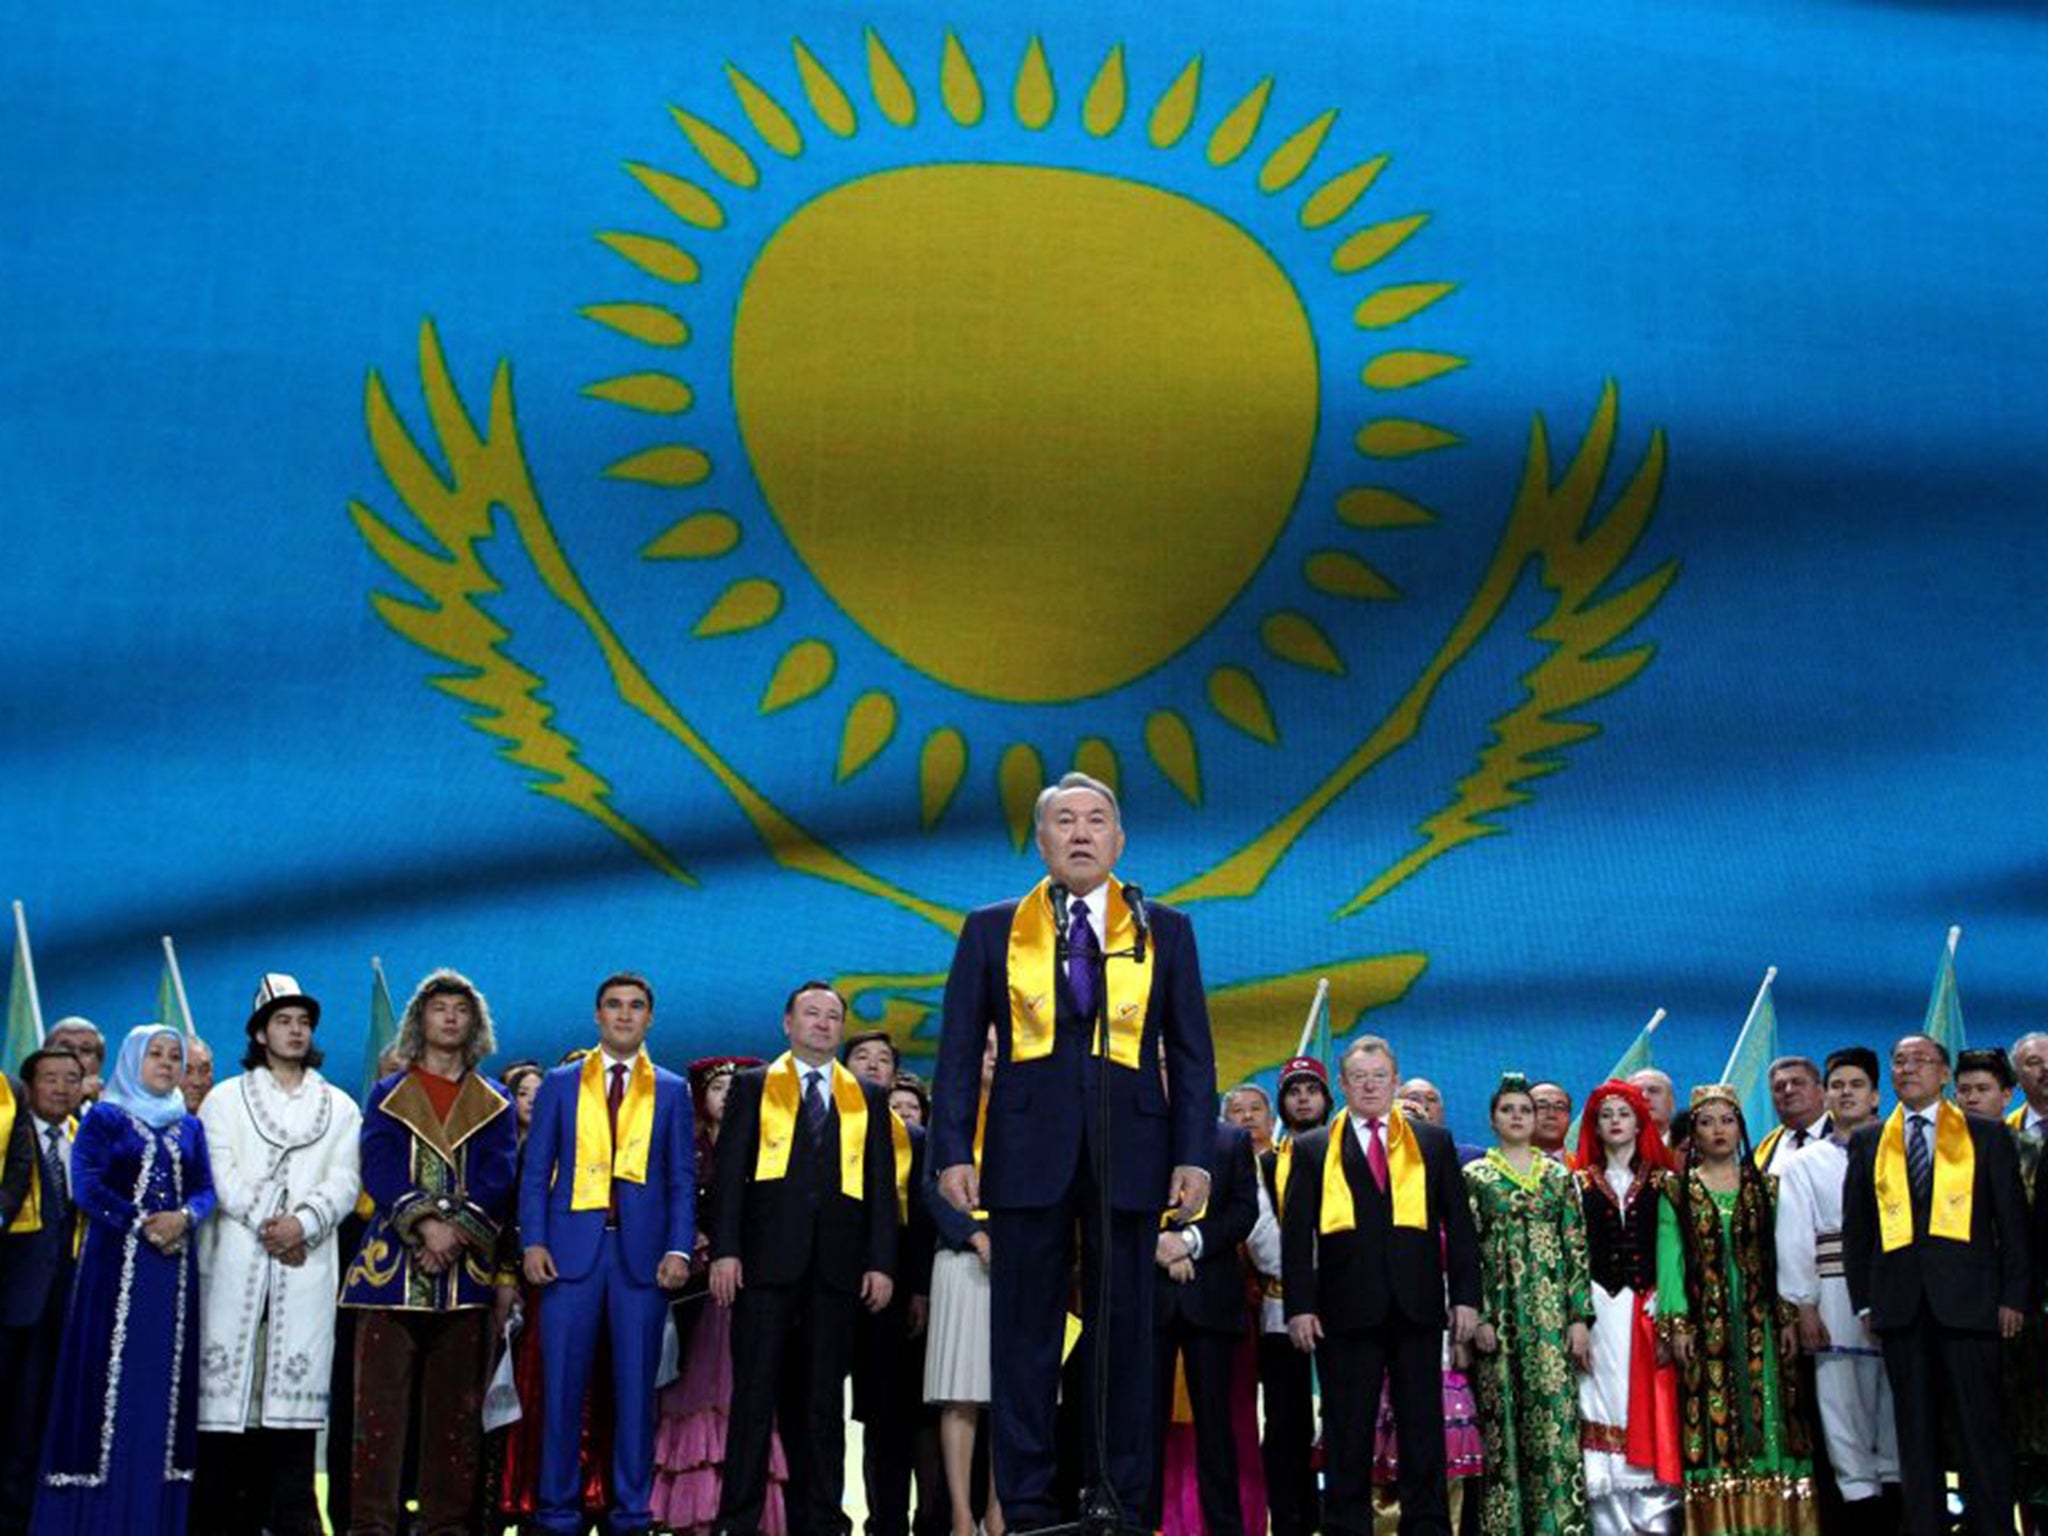 The Kazakh President, Nursultan Nazarbayev, at a rally in honour of his victory in Astana